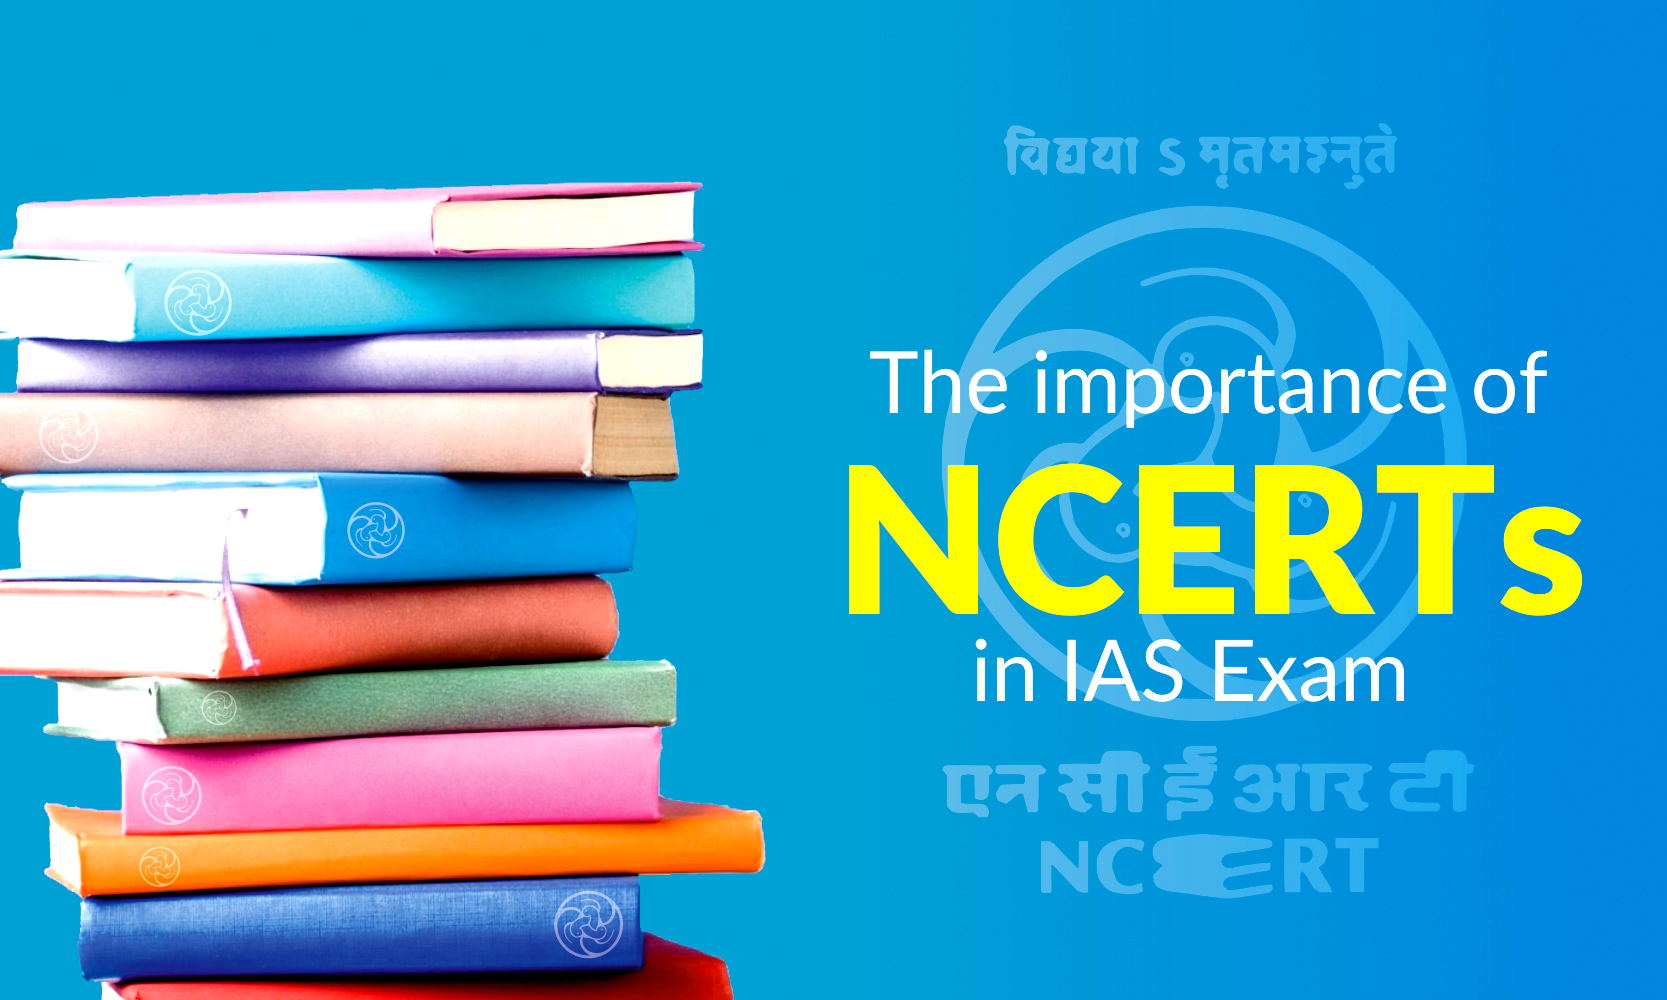 THE IMPORTANCE OF NCERTS IN IAS EXAM